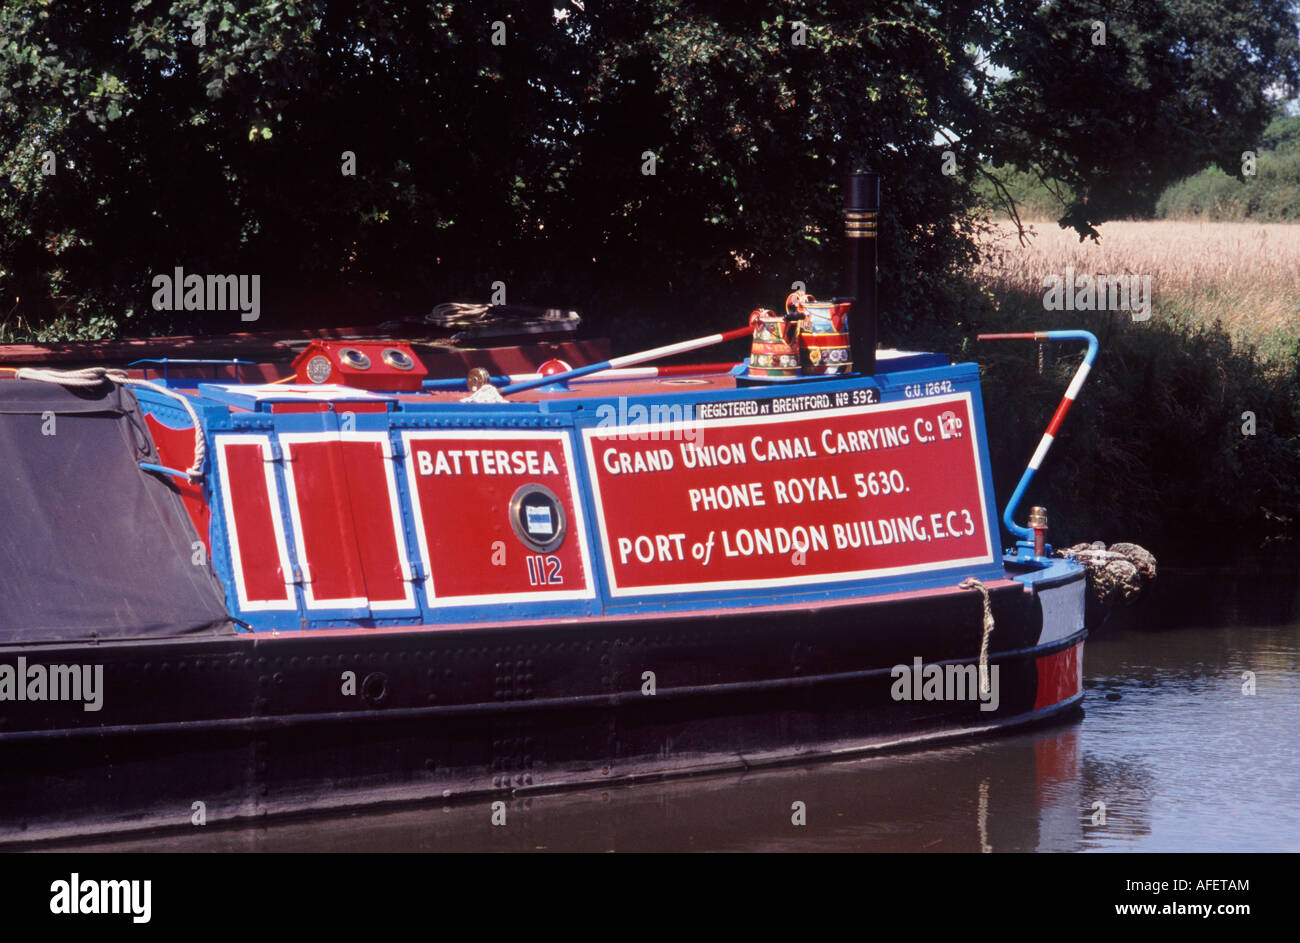 Brightly painted traditional working narrowboat (Grand Union Canal Carrying Co) with striped tiller and canalware, Staffordshire Stock Photo